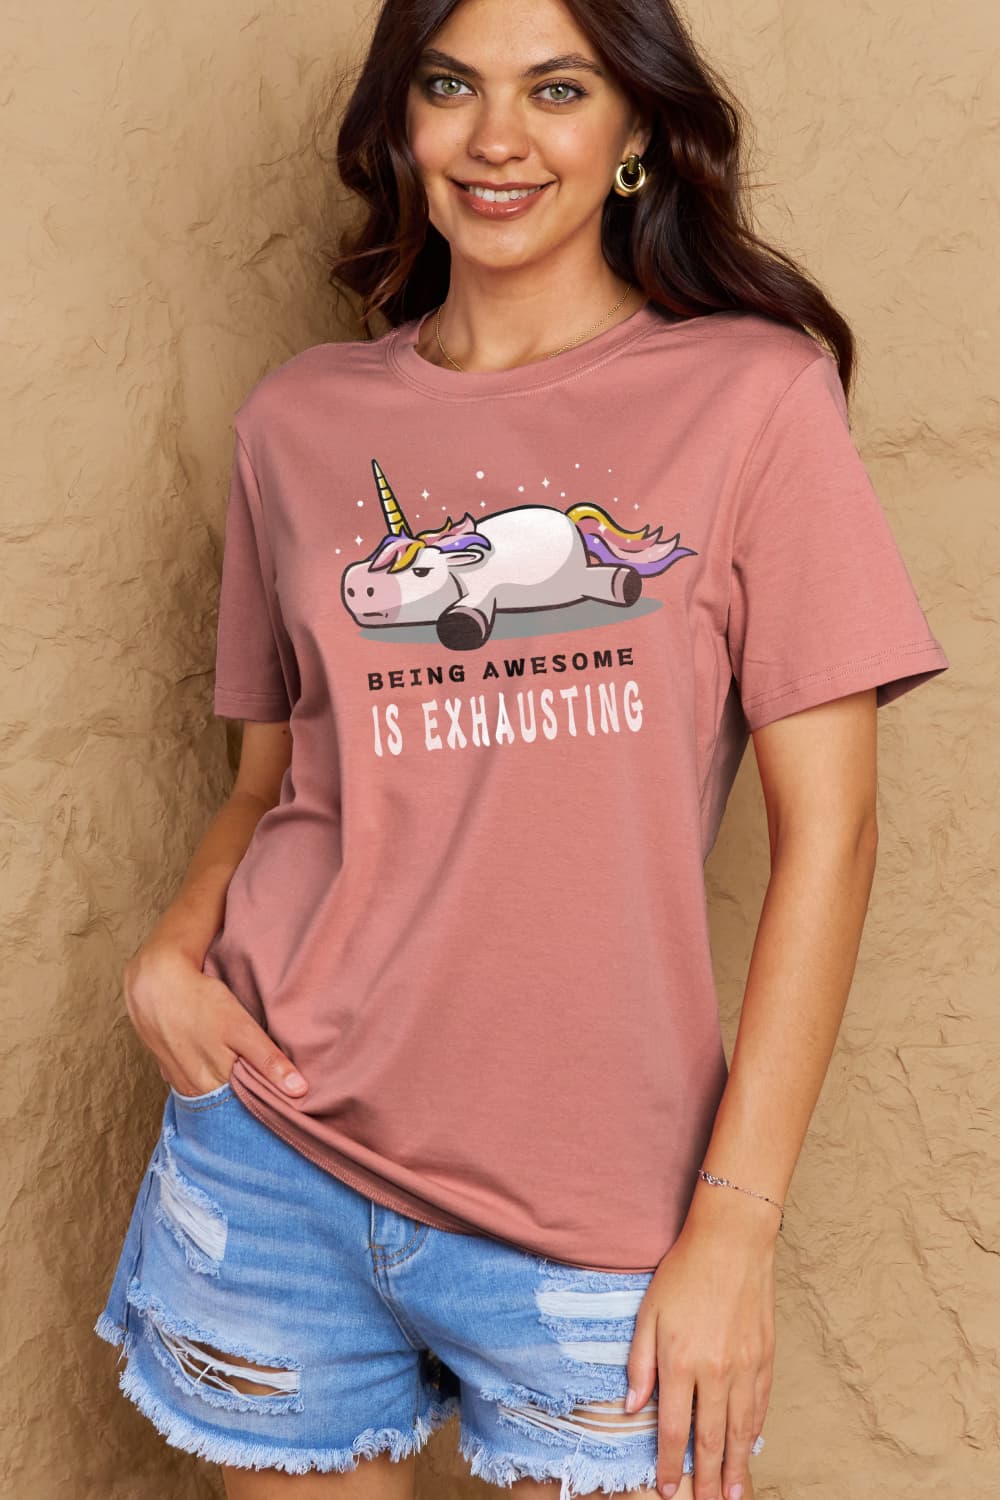 Full Size BEING AWESOME IS EXHAUSTING Graphic Cotton Tee - Kawaii Stop - Casual Style, Comfortable, Confidence, Empowering, Everyday Wear, Fashionista's Choice, Graphic Tee, Hand Wash, Imported, Inspirational, Long Tee, Opaque, Relaxed Fit, Ship From Overseas, Shipping Delay 09/29/2023 - 10/04/2023, Simply Love, Statement Piece, T-Shirt, T-Shirts, Tee, Trendy, Versatile, Women's Clothing, Women's Top